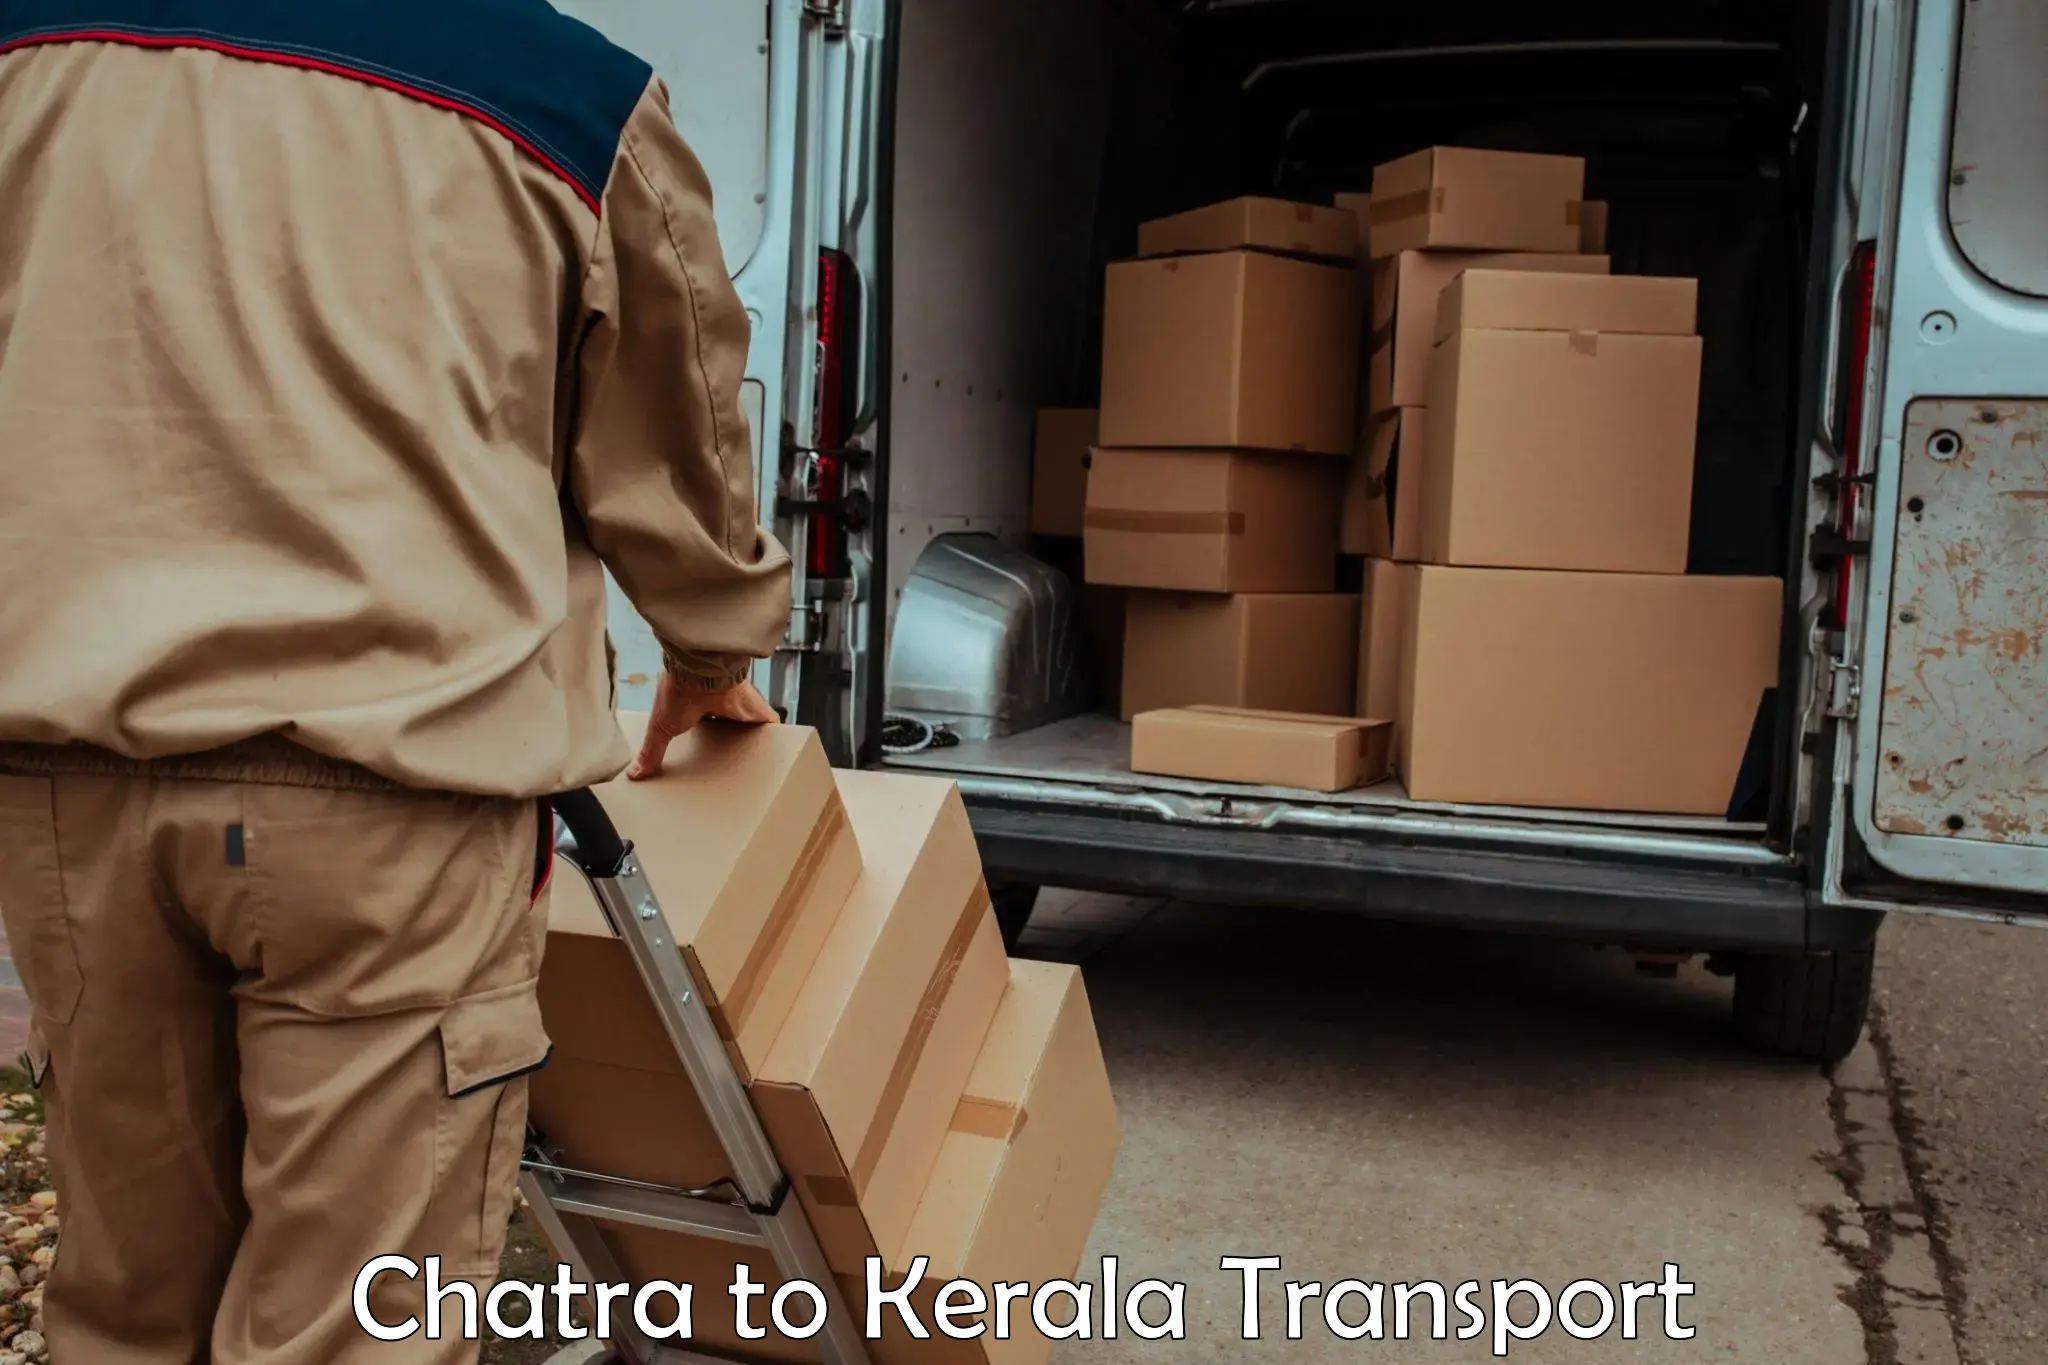 Express transport services Chatra to Palakkad